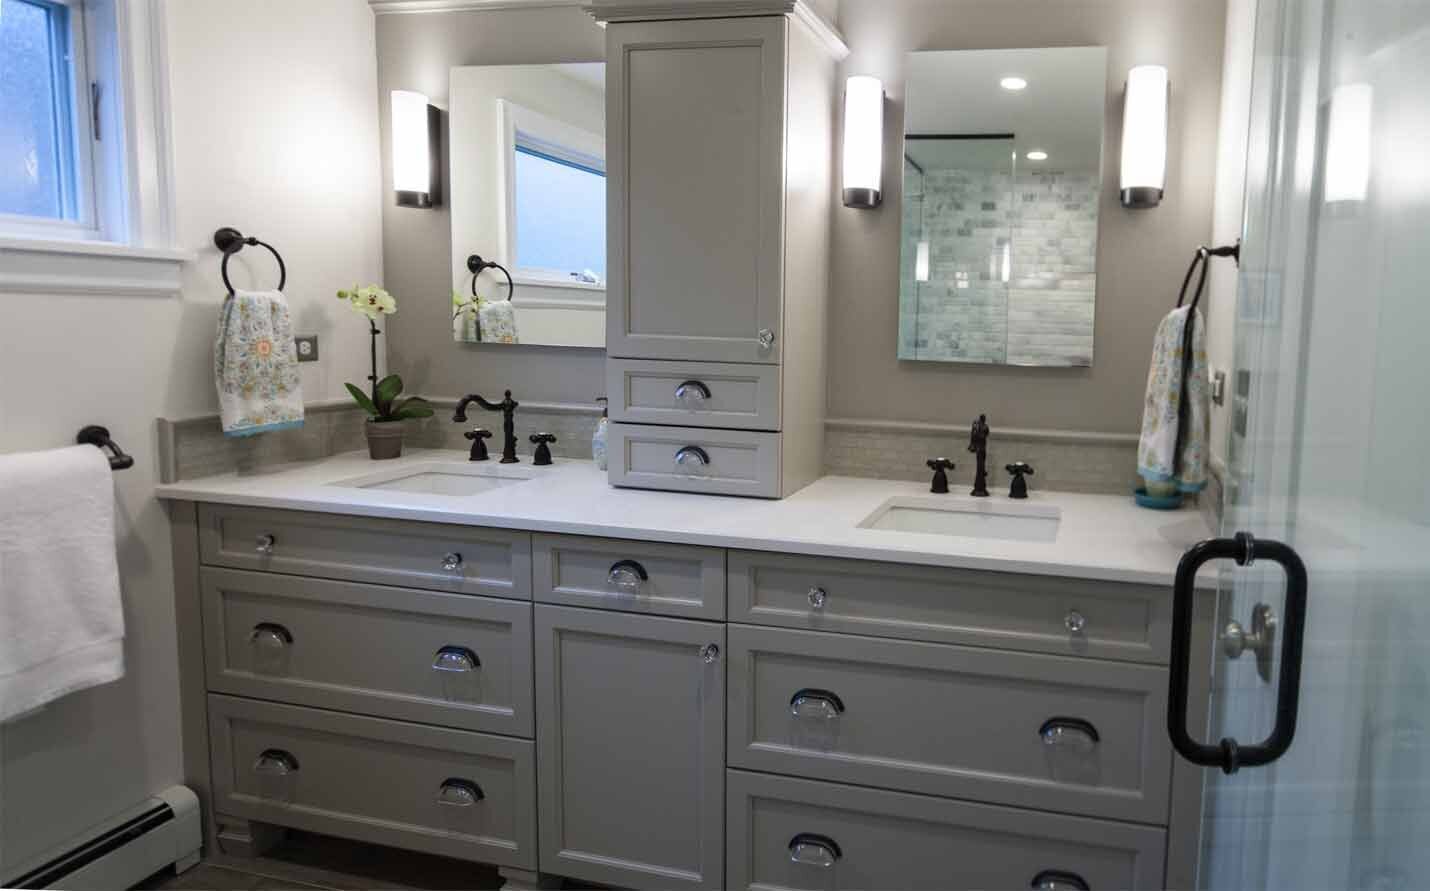 Bathroom with his and hers sinks with grey cabinets and a white counter